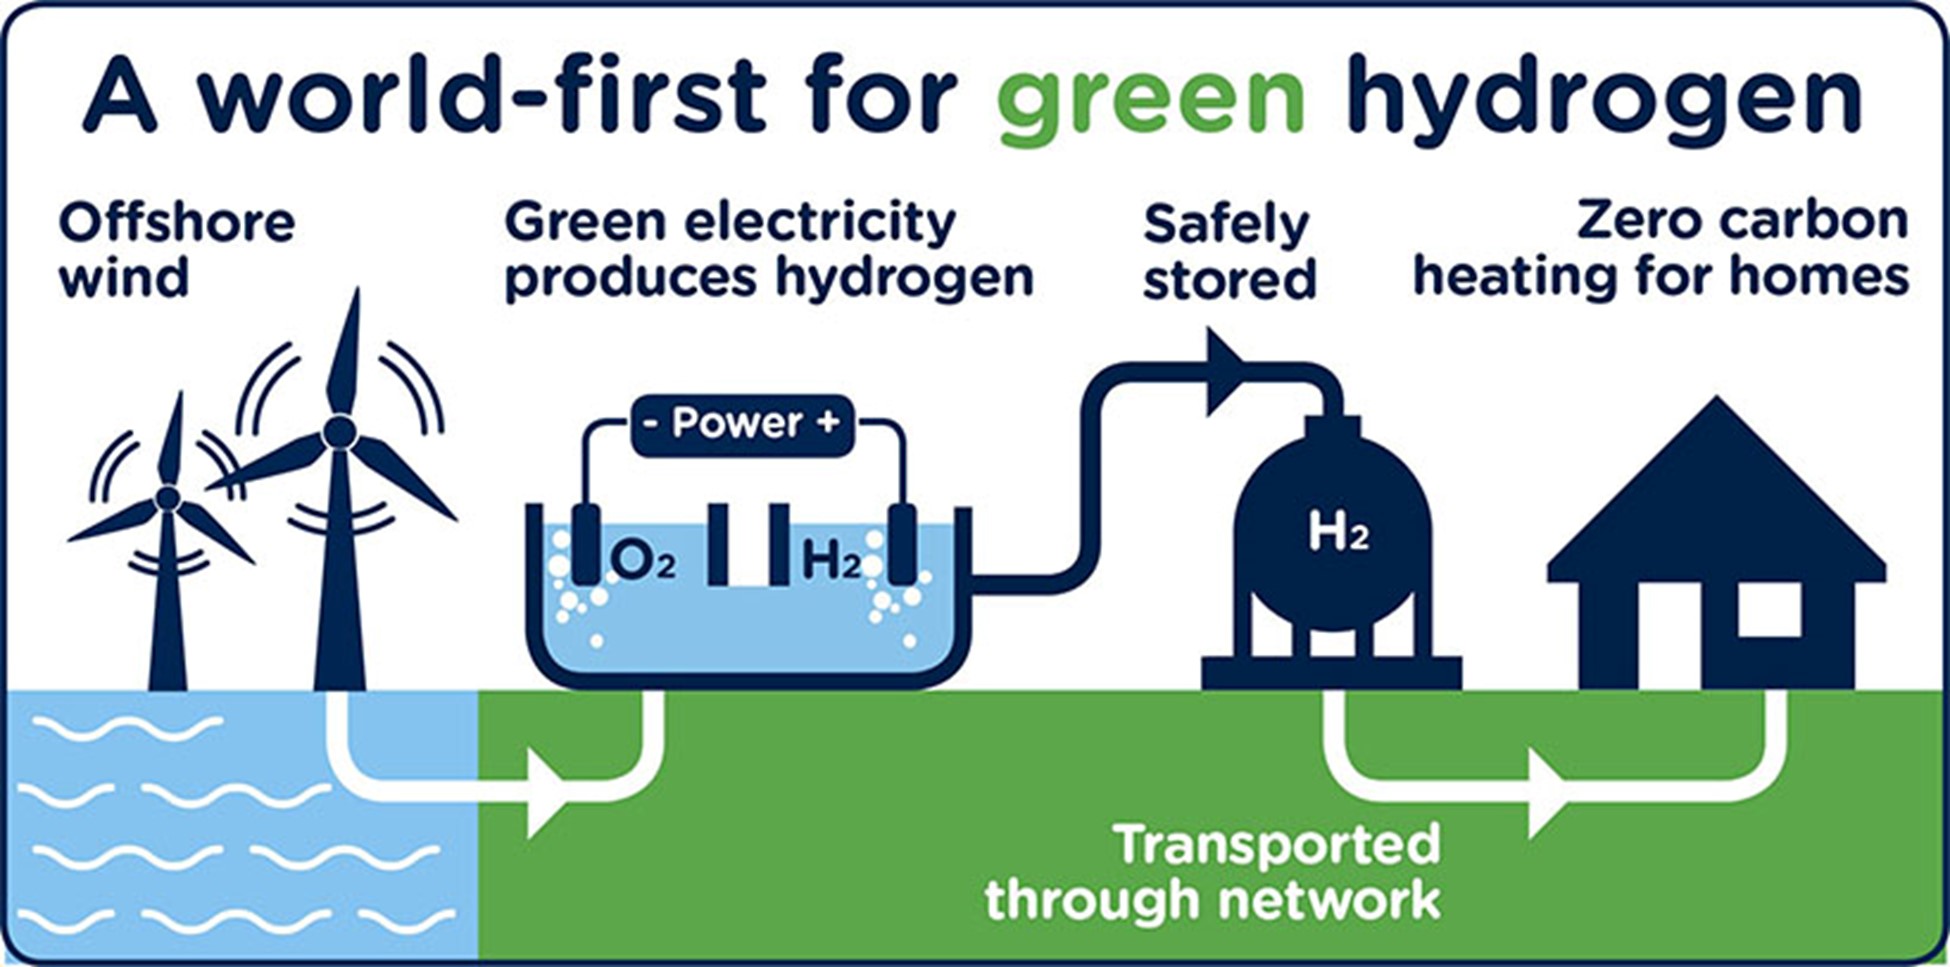 A chart showing the flow of hydrogen power production, from wind turbines, storage, network transportation, to use in homes